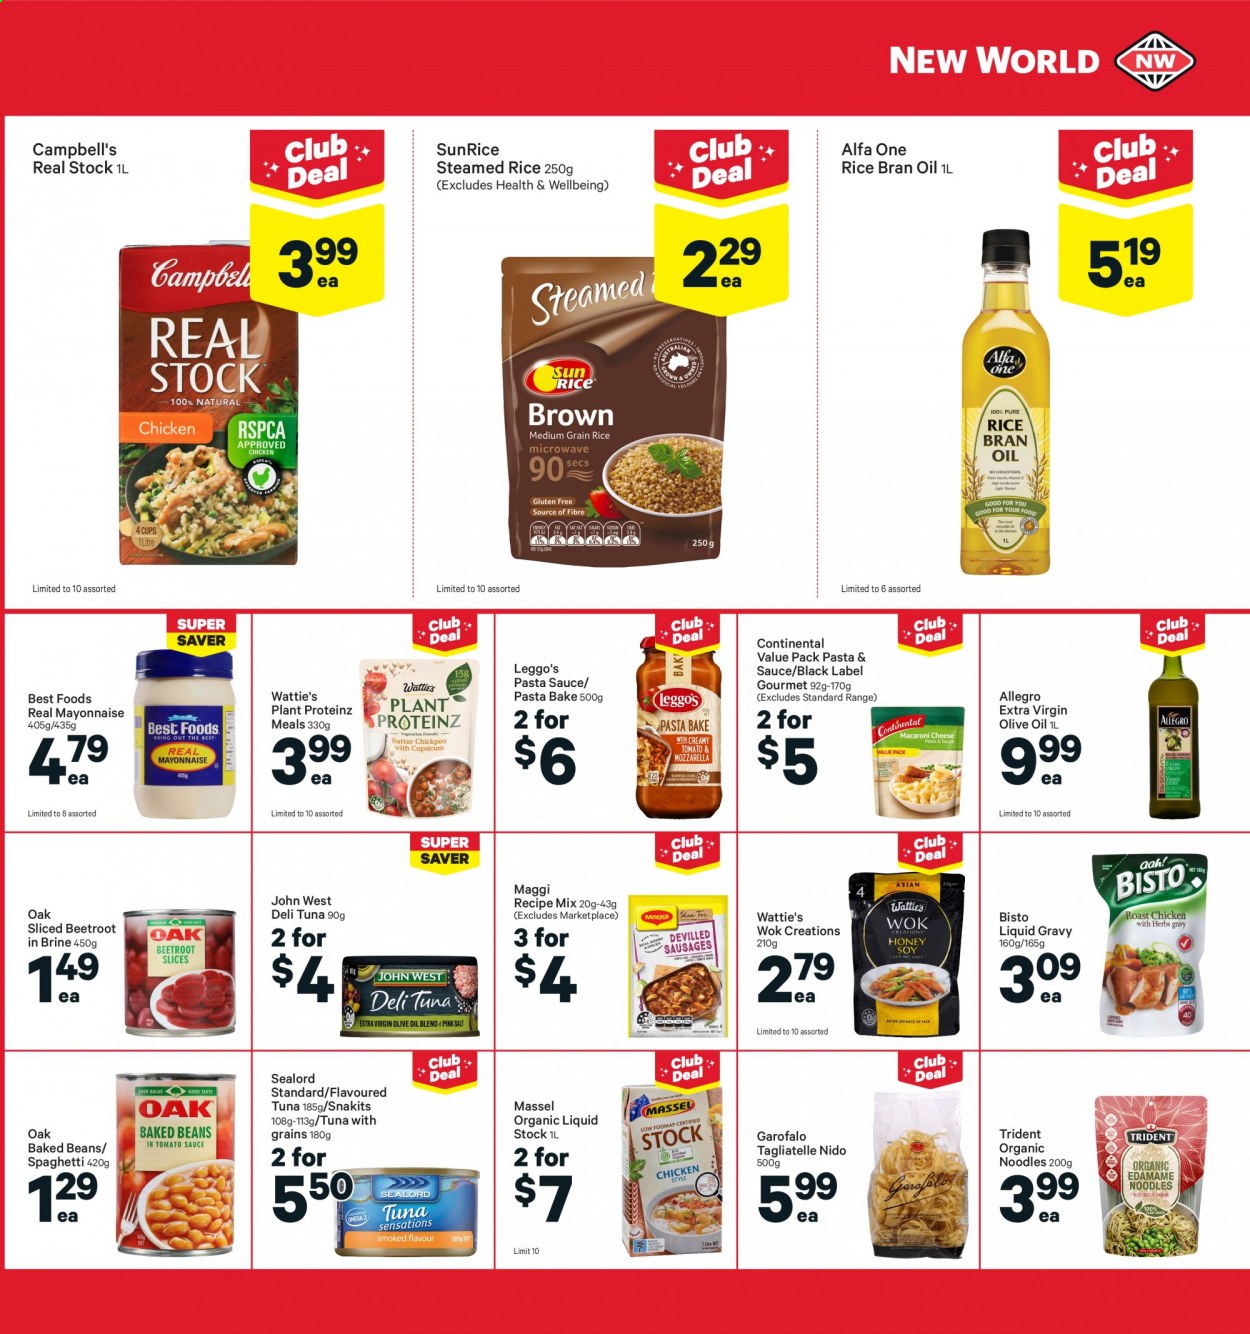 thumbnail - New World mailer - 05.07.2021 - 11.07.2021 - Sales products - beans, tuna, Sealord, Campbell's, spaghetti, pasta sauce, noodles, Wattie's, Continental, mayonnaise, Trident, Maggi, baked beans, extra virgin olive oil, olive oil, oil, rais oil. Page 17.